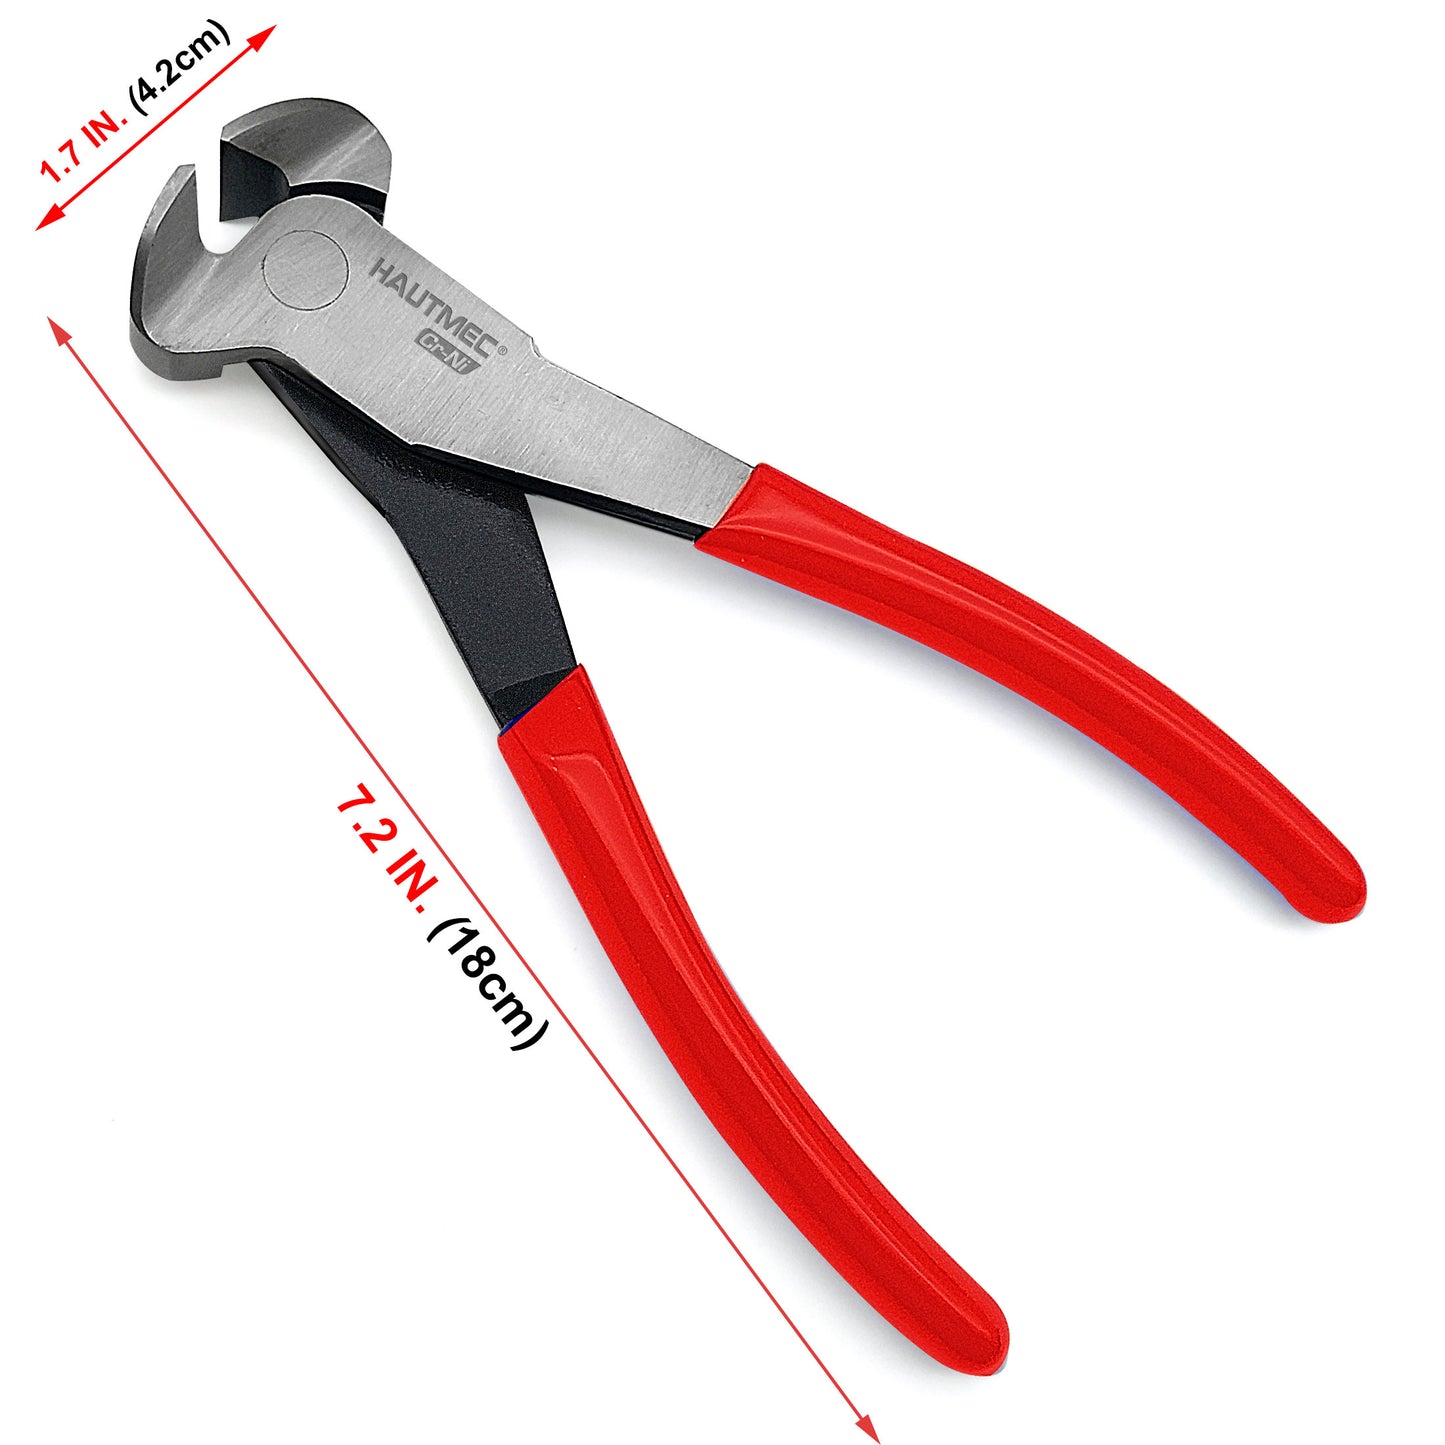 HAUTMEC End Cutting Pliers 7 Inch Nail Puller Pliers End Cutting Nippers for cutting or pulling nails and wires HT0158-CP